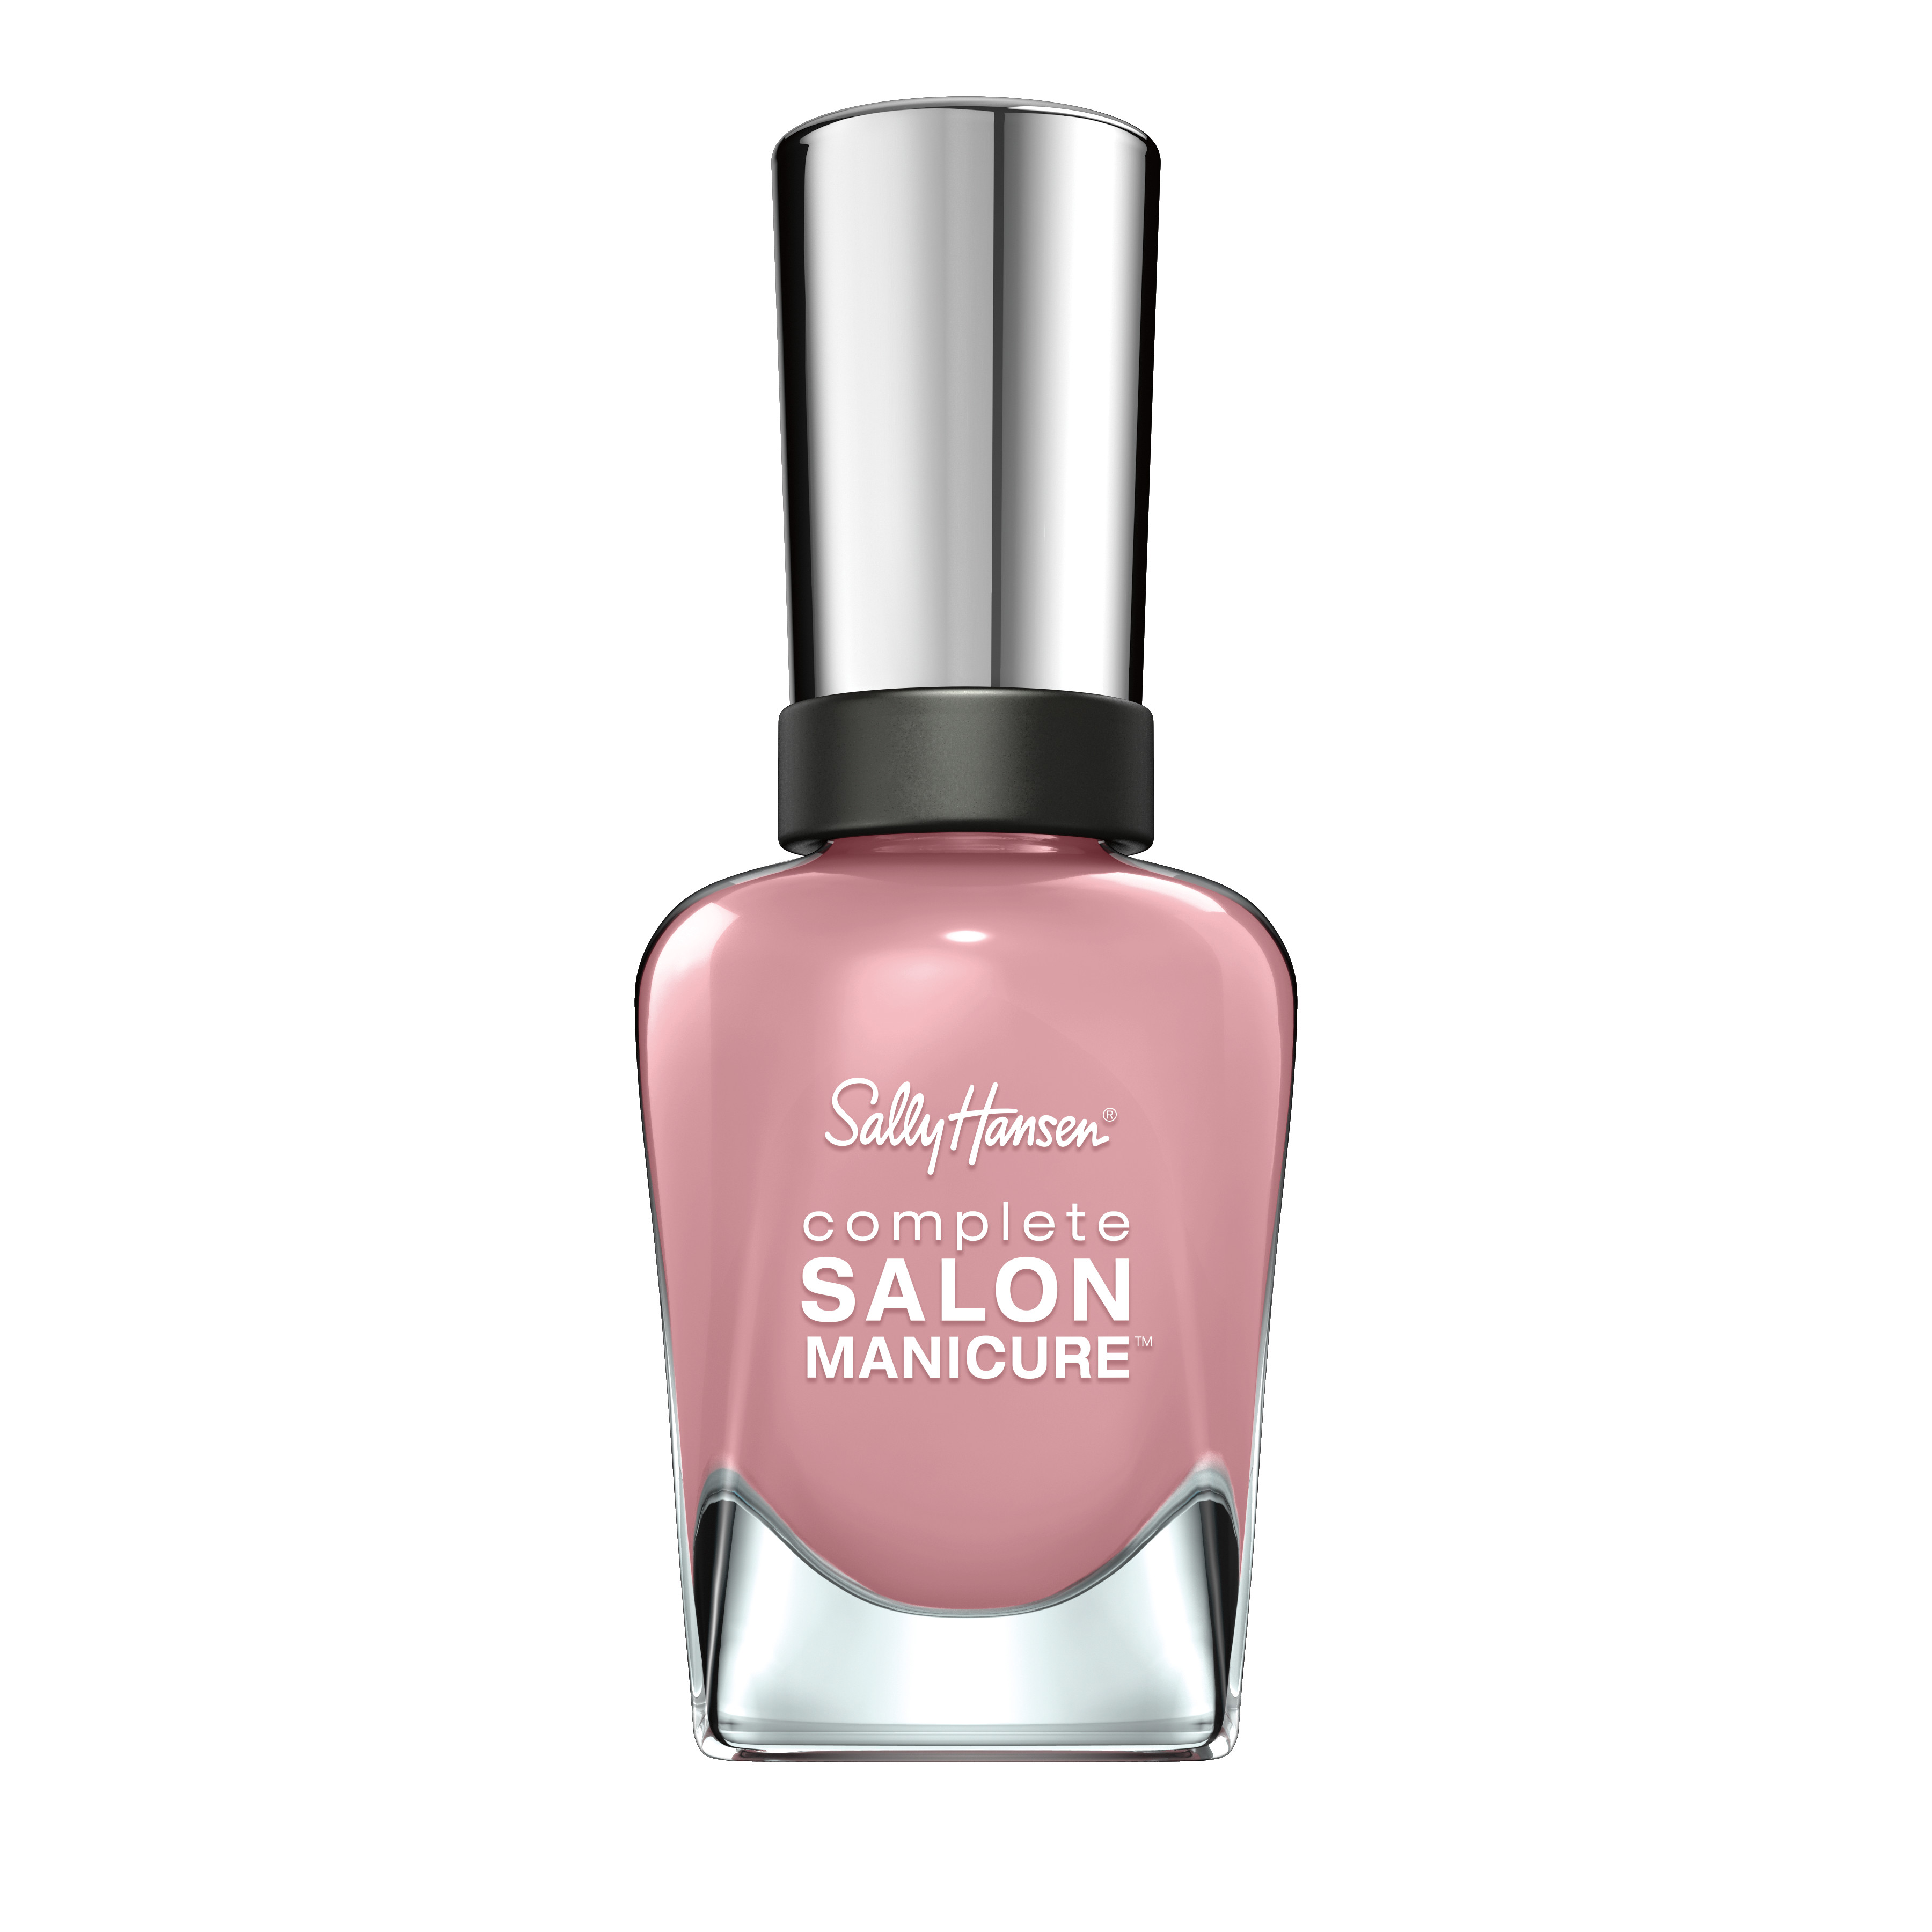 Sally Hansen Complete Salon Manicure Nail Color, Rose to the Occasion - image 1 of 2